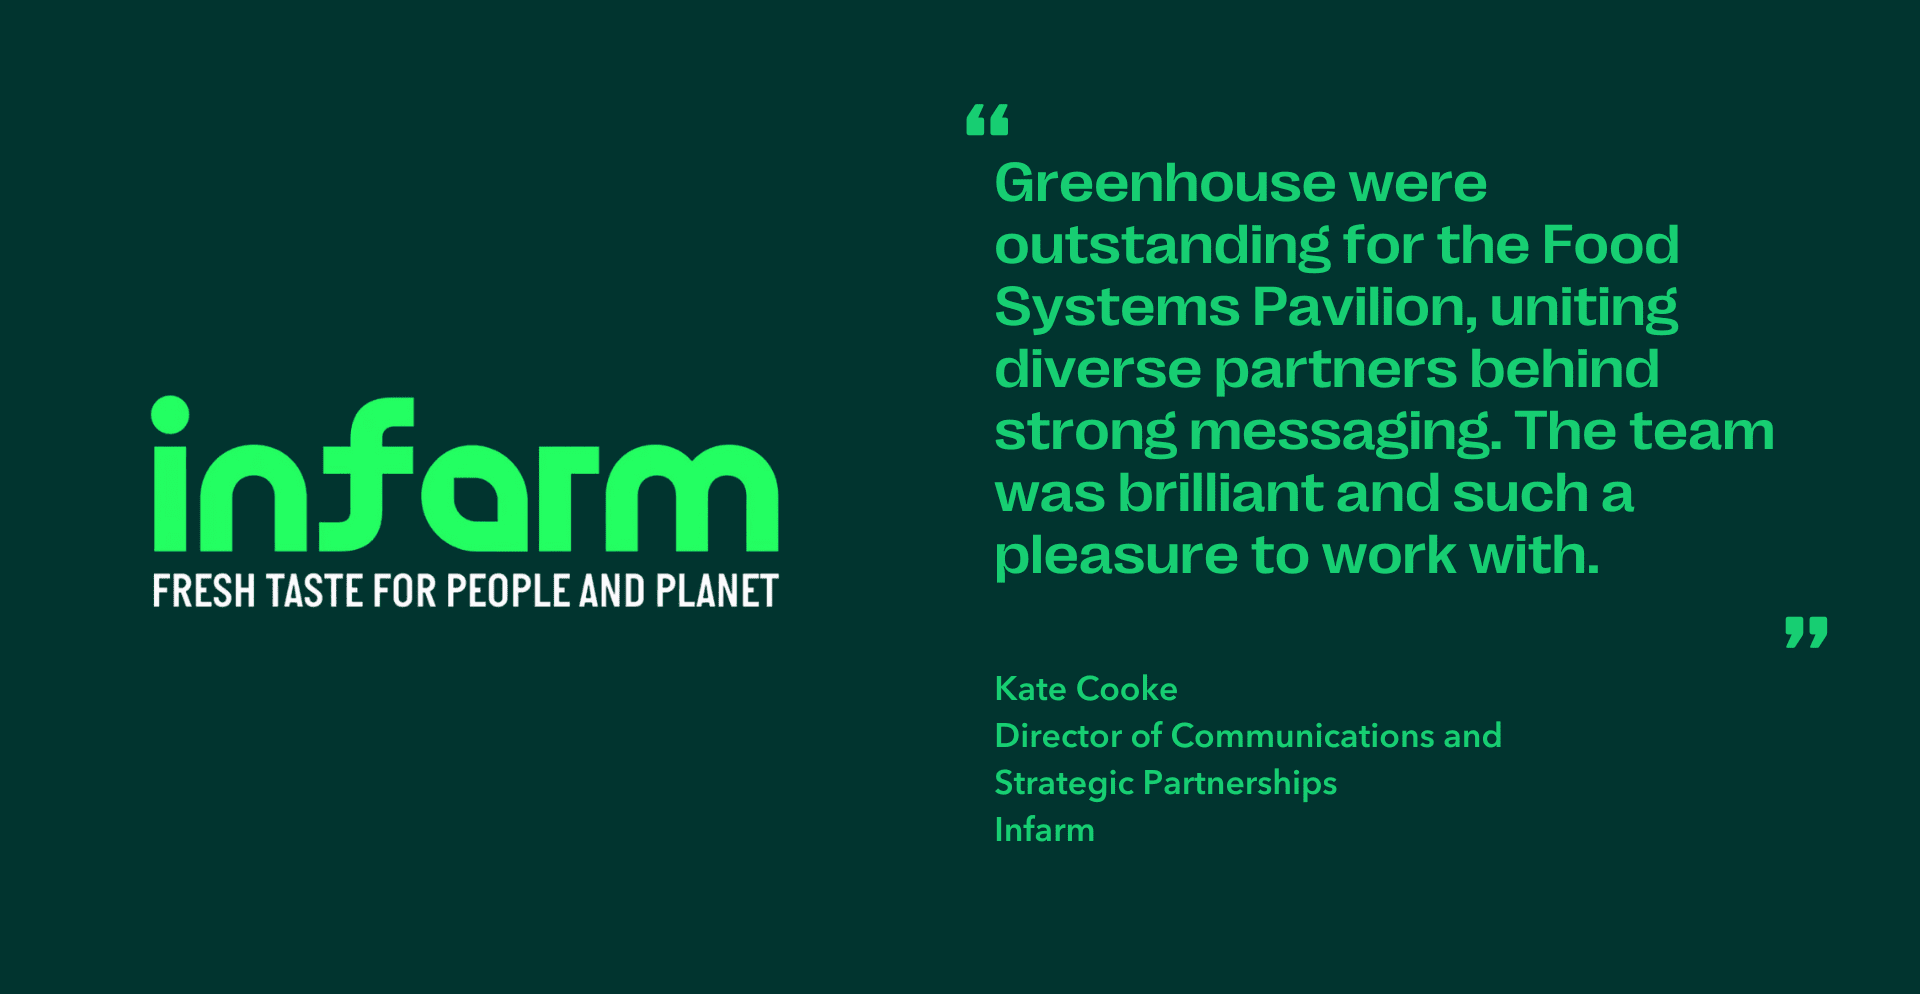 Quote by Kate Cooke, Director of Communications and Strategic Partnerships at Infarm